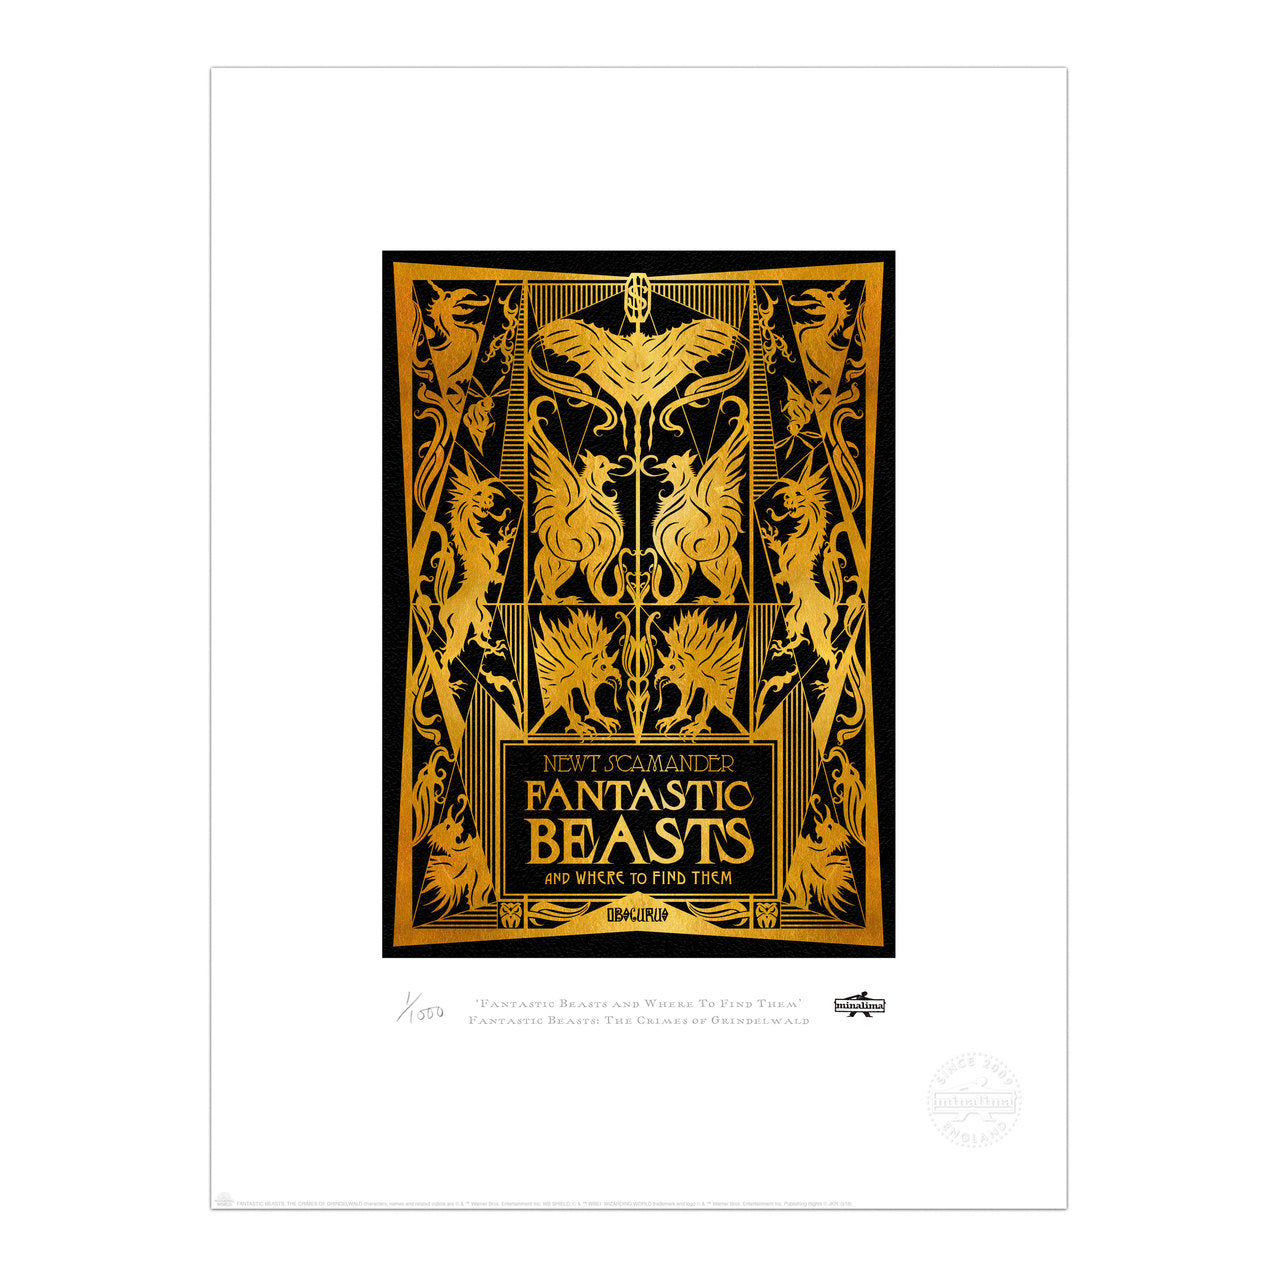 "Fantastic Beasts and Where to Find Them" Book Cover Limited Edition Art Print